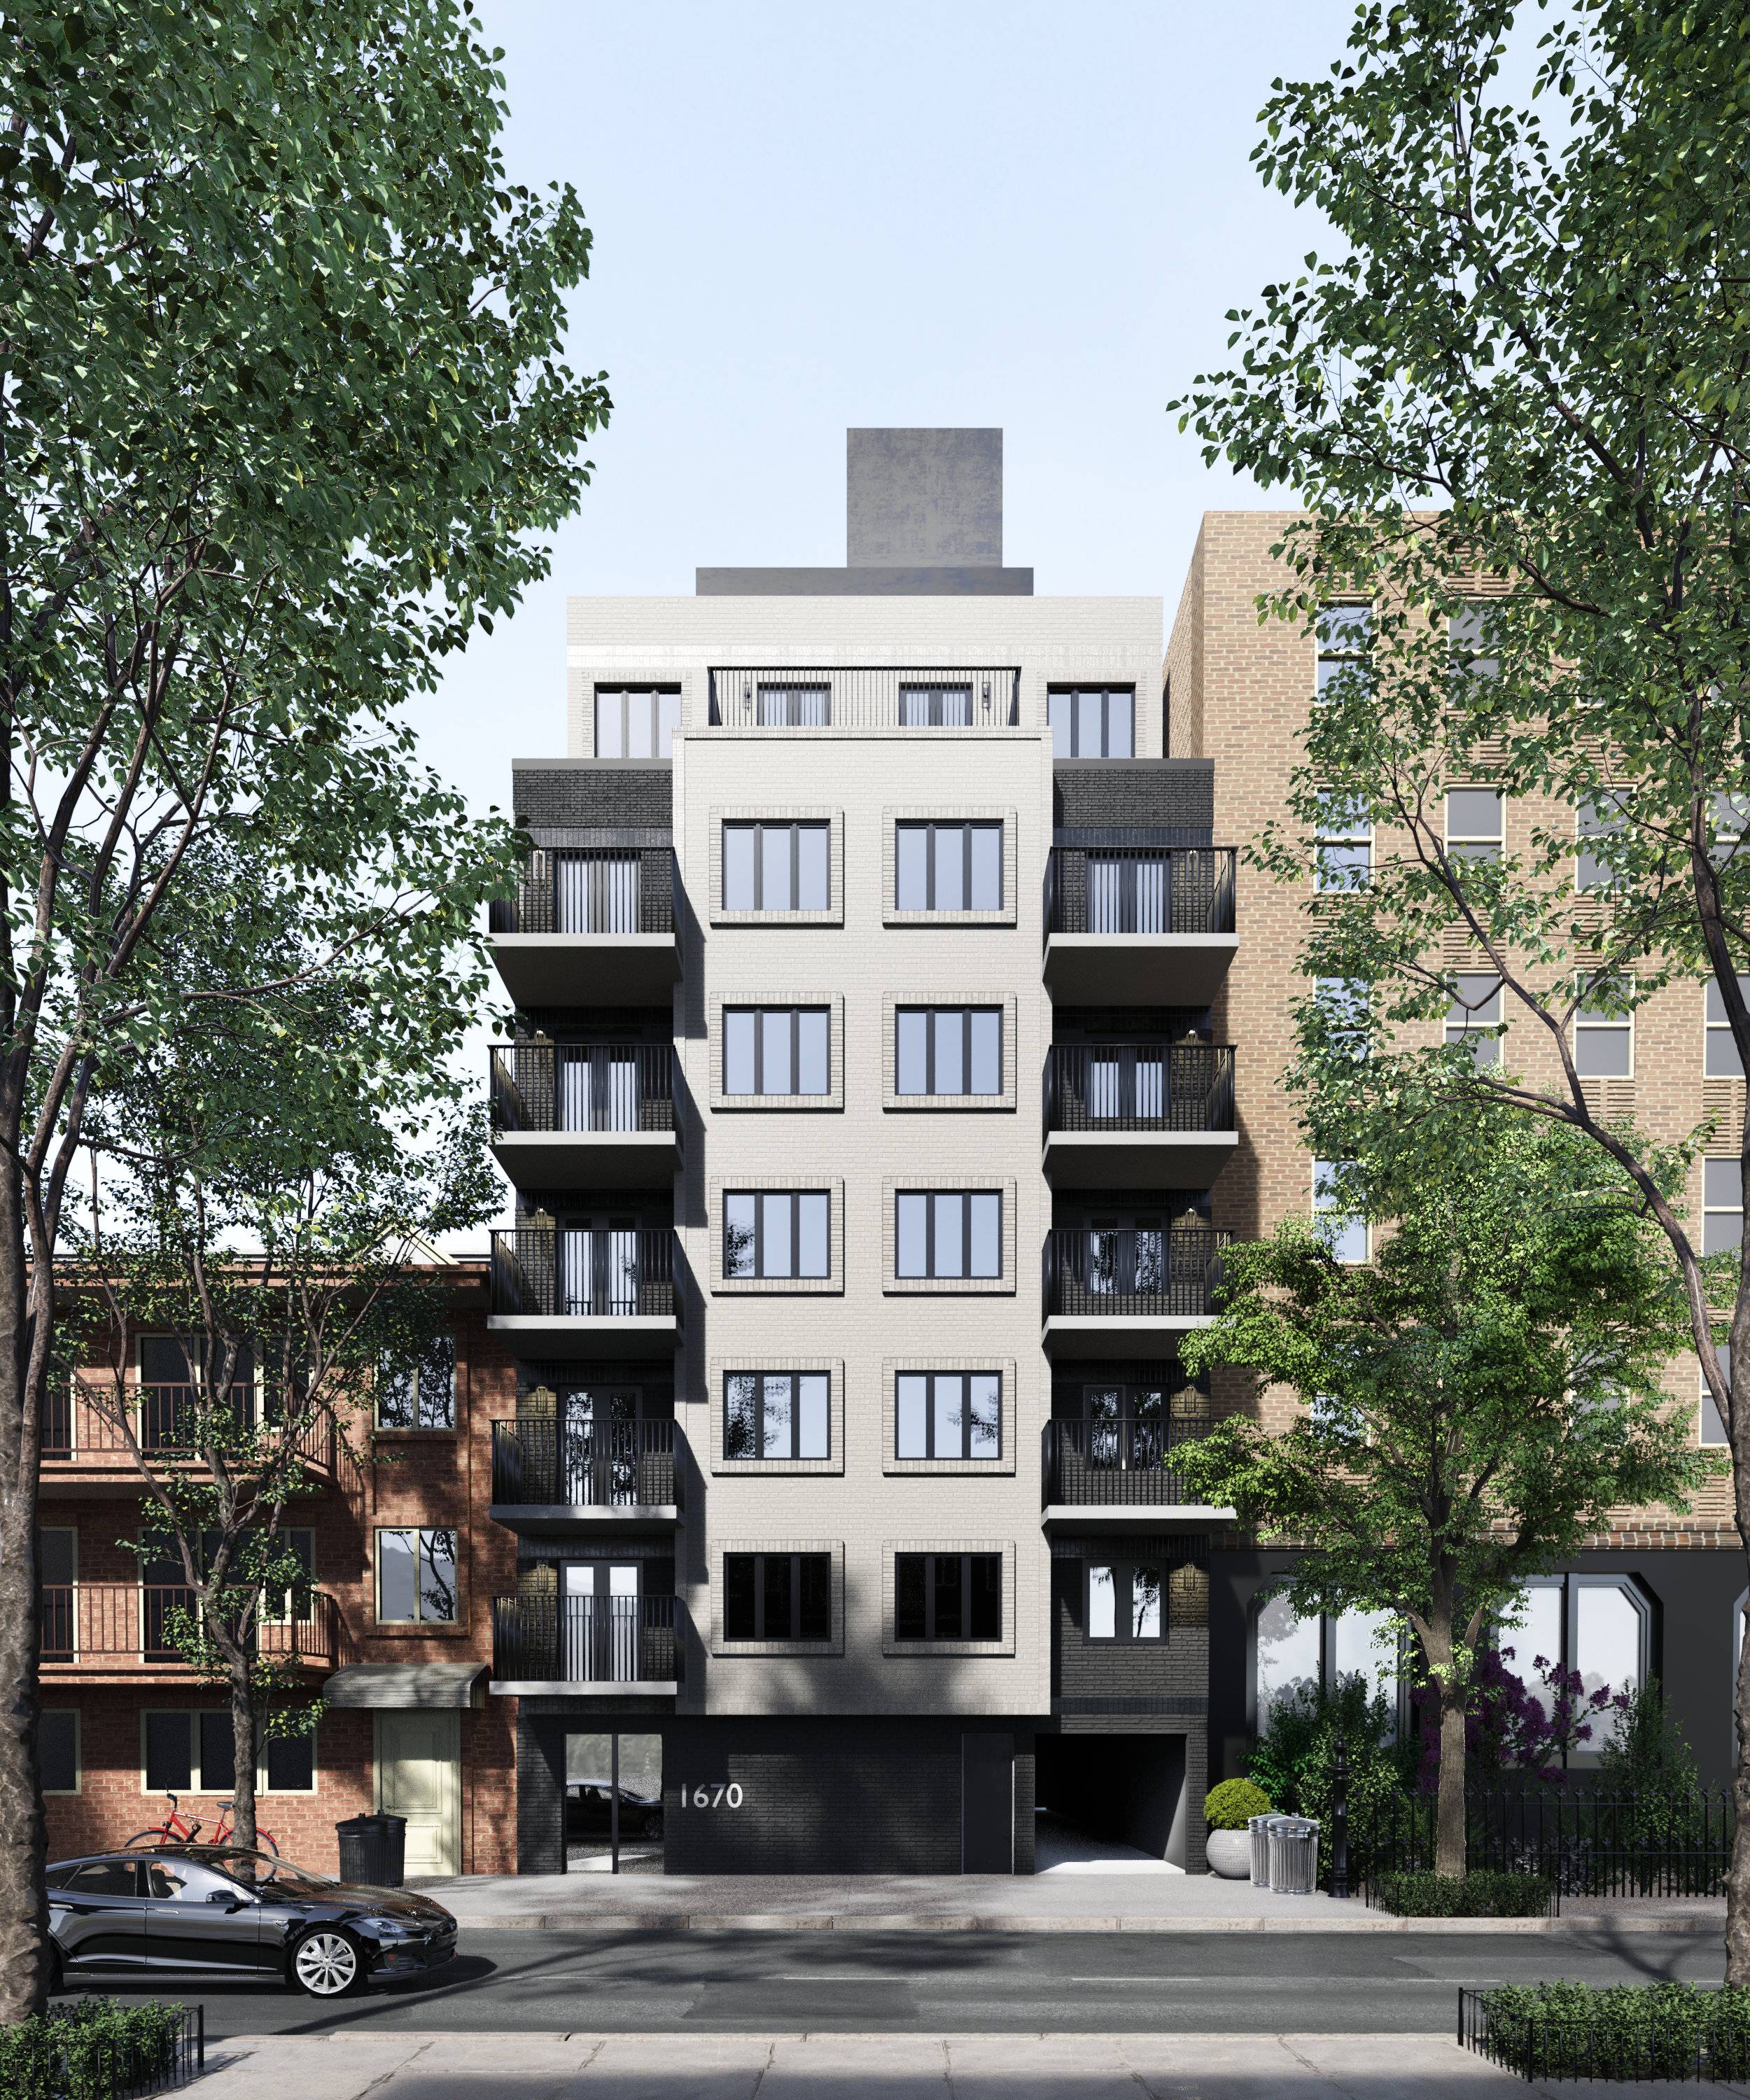 Welcome to The Homecrest Condominium, a ground up boutique new development designed for comfort, luxury, and longevity and constructed with materials of the highest grade inside and out.